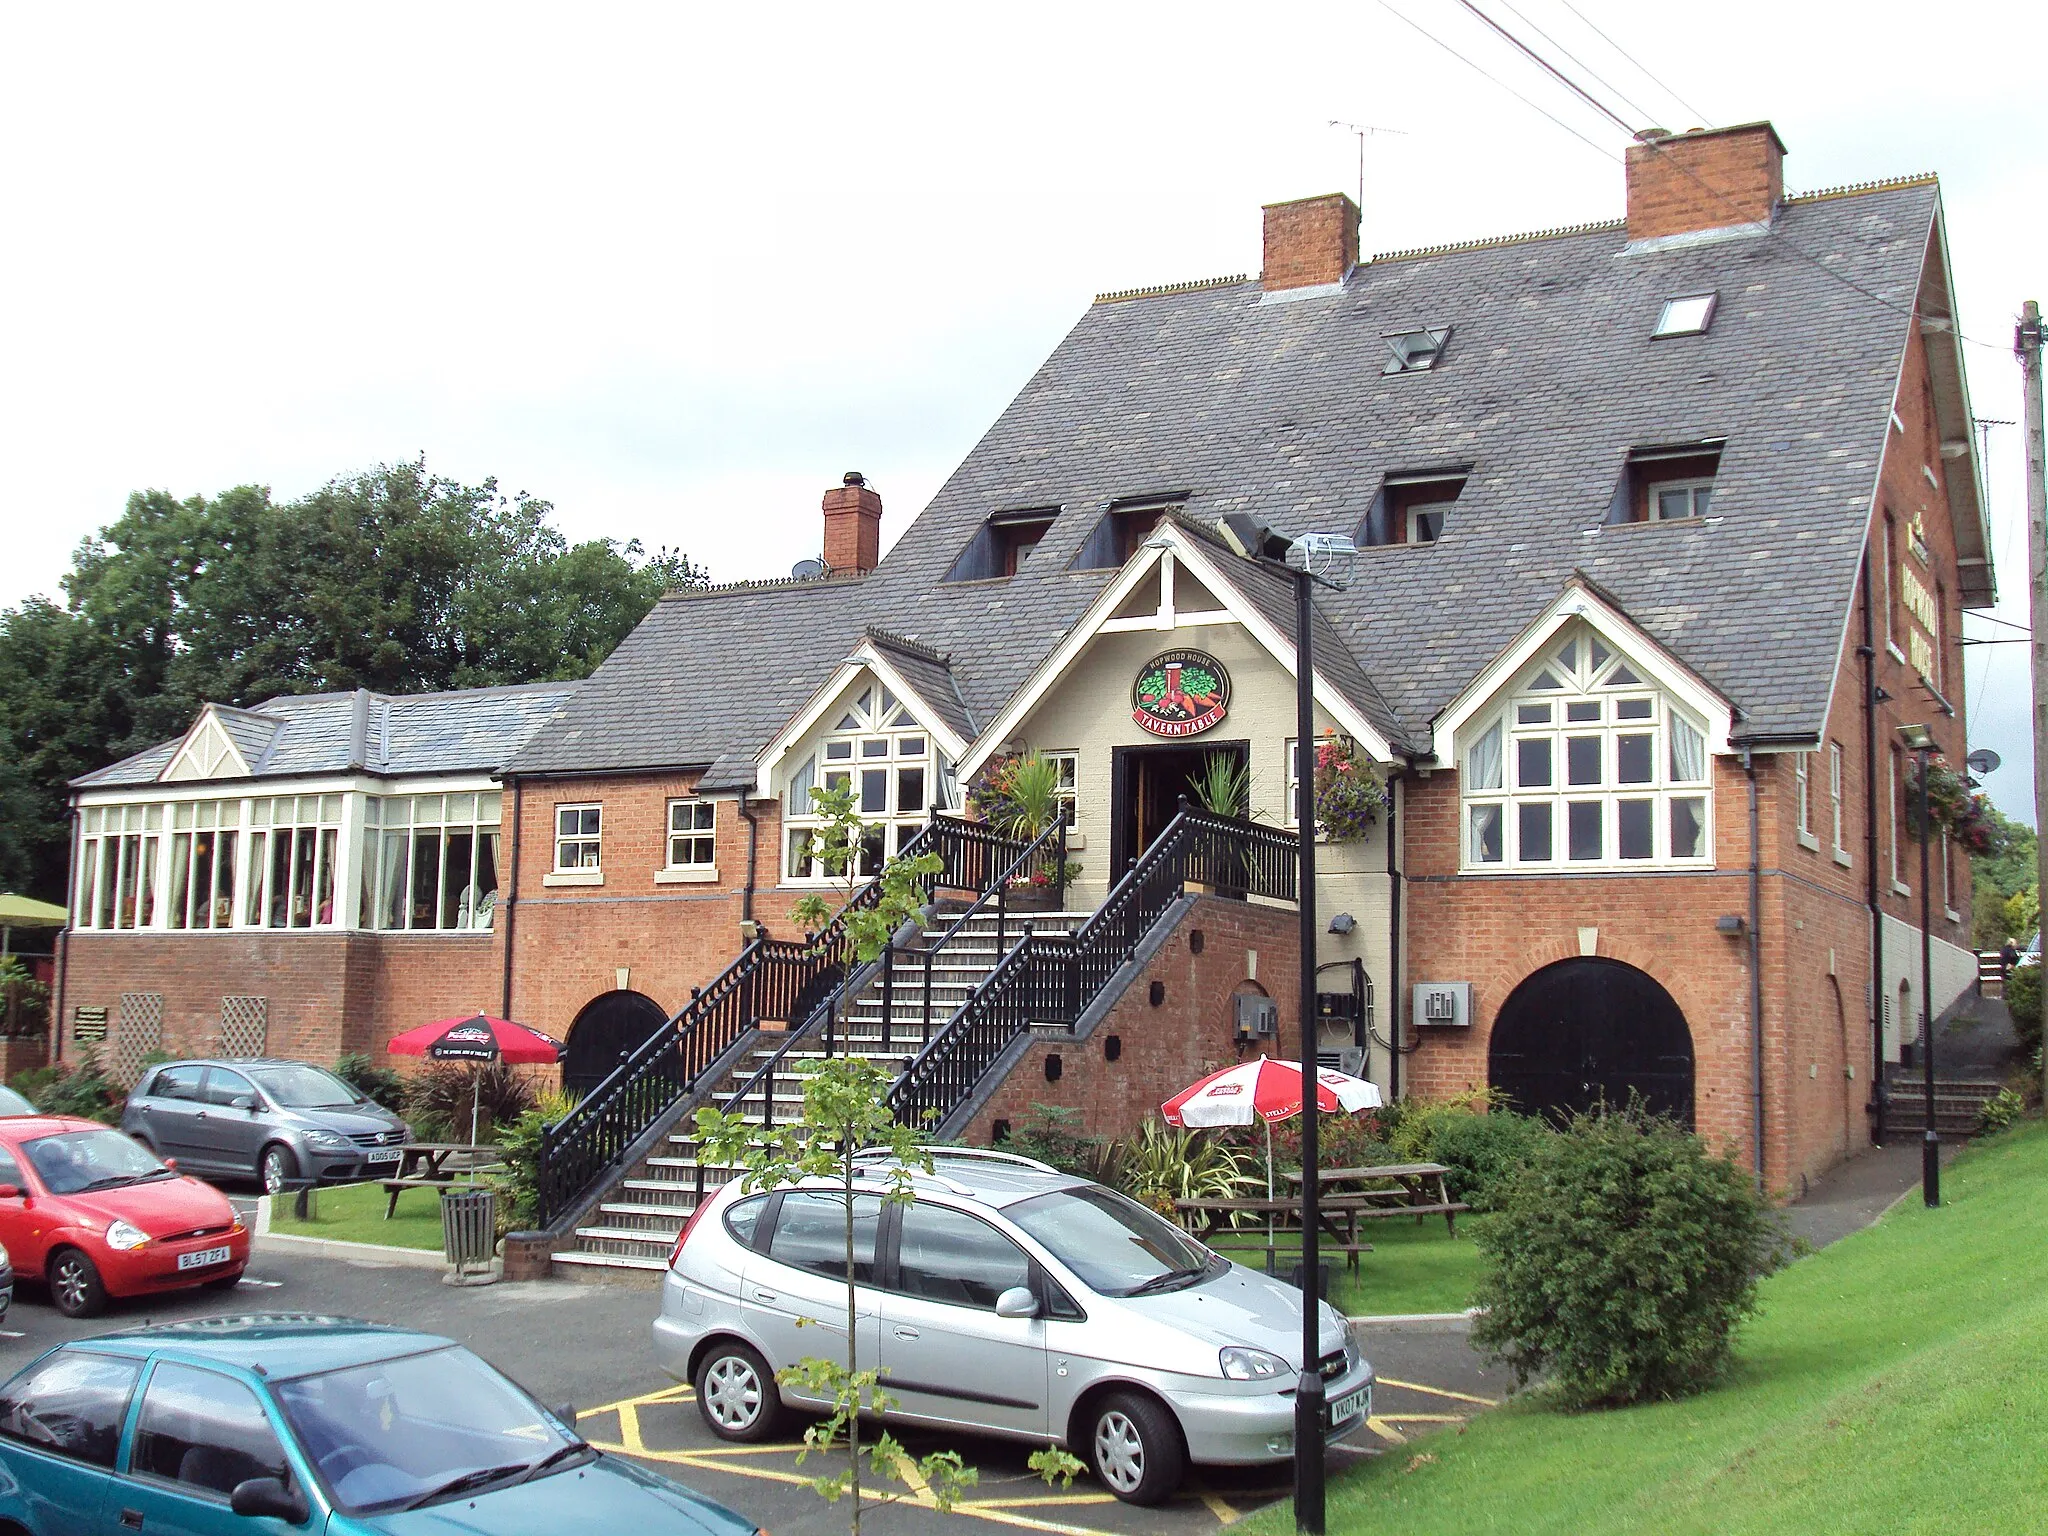 Photo showing: The Hopwood House Inn on the A441 Redditch Road at Hopwood, Worcestershire, England.